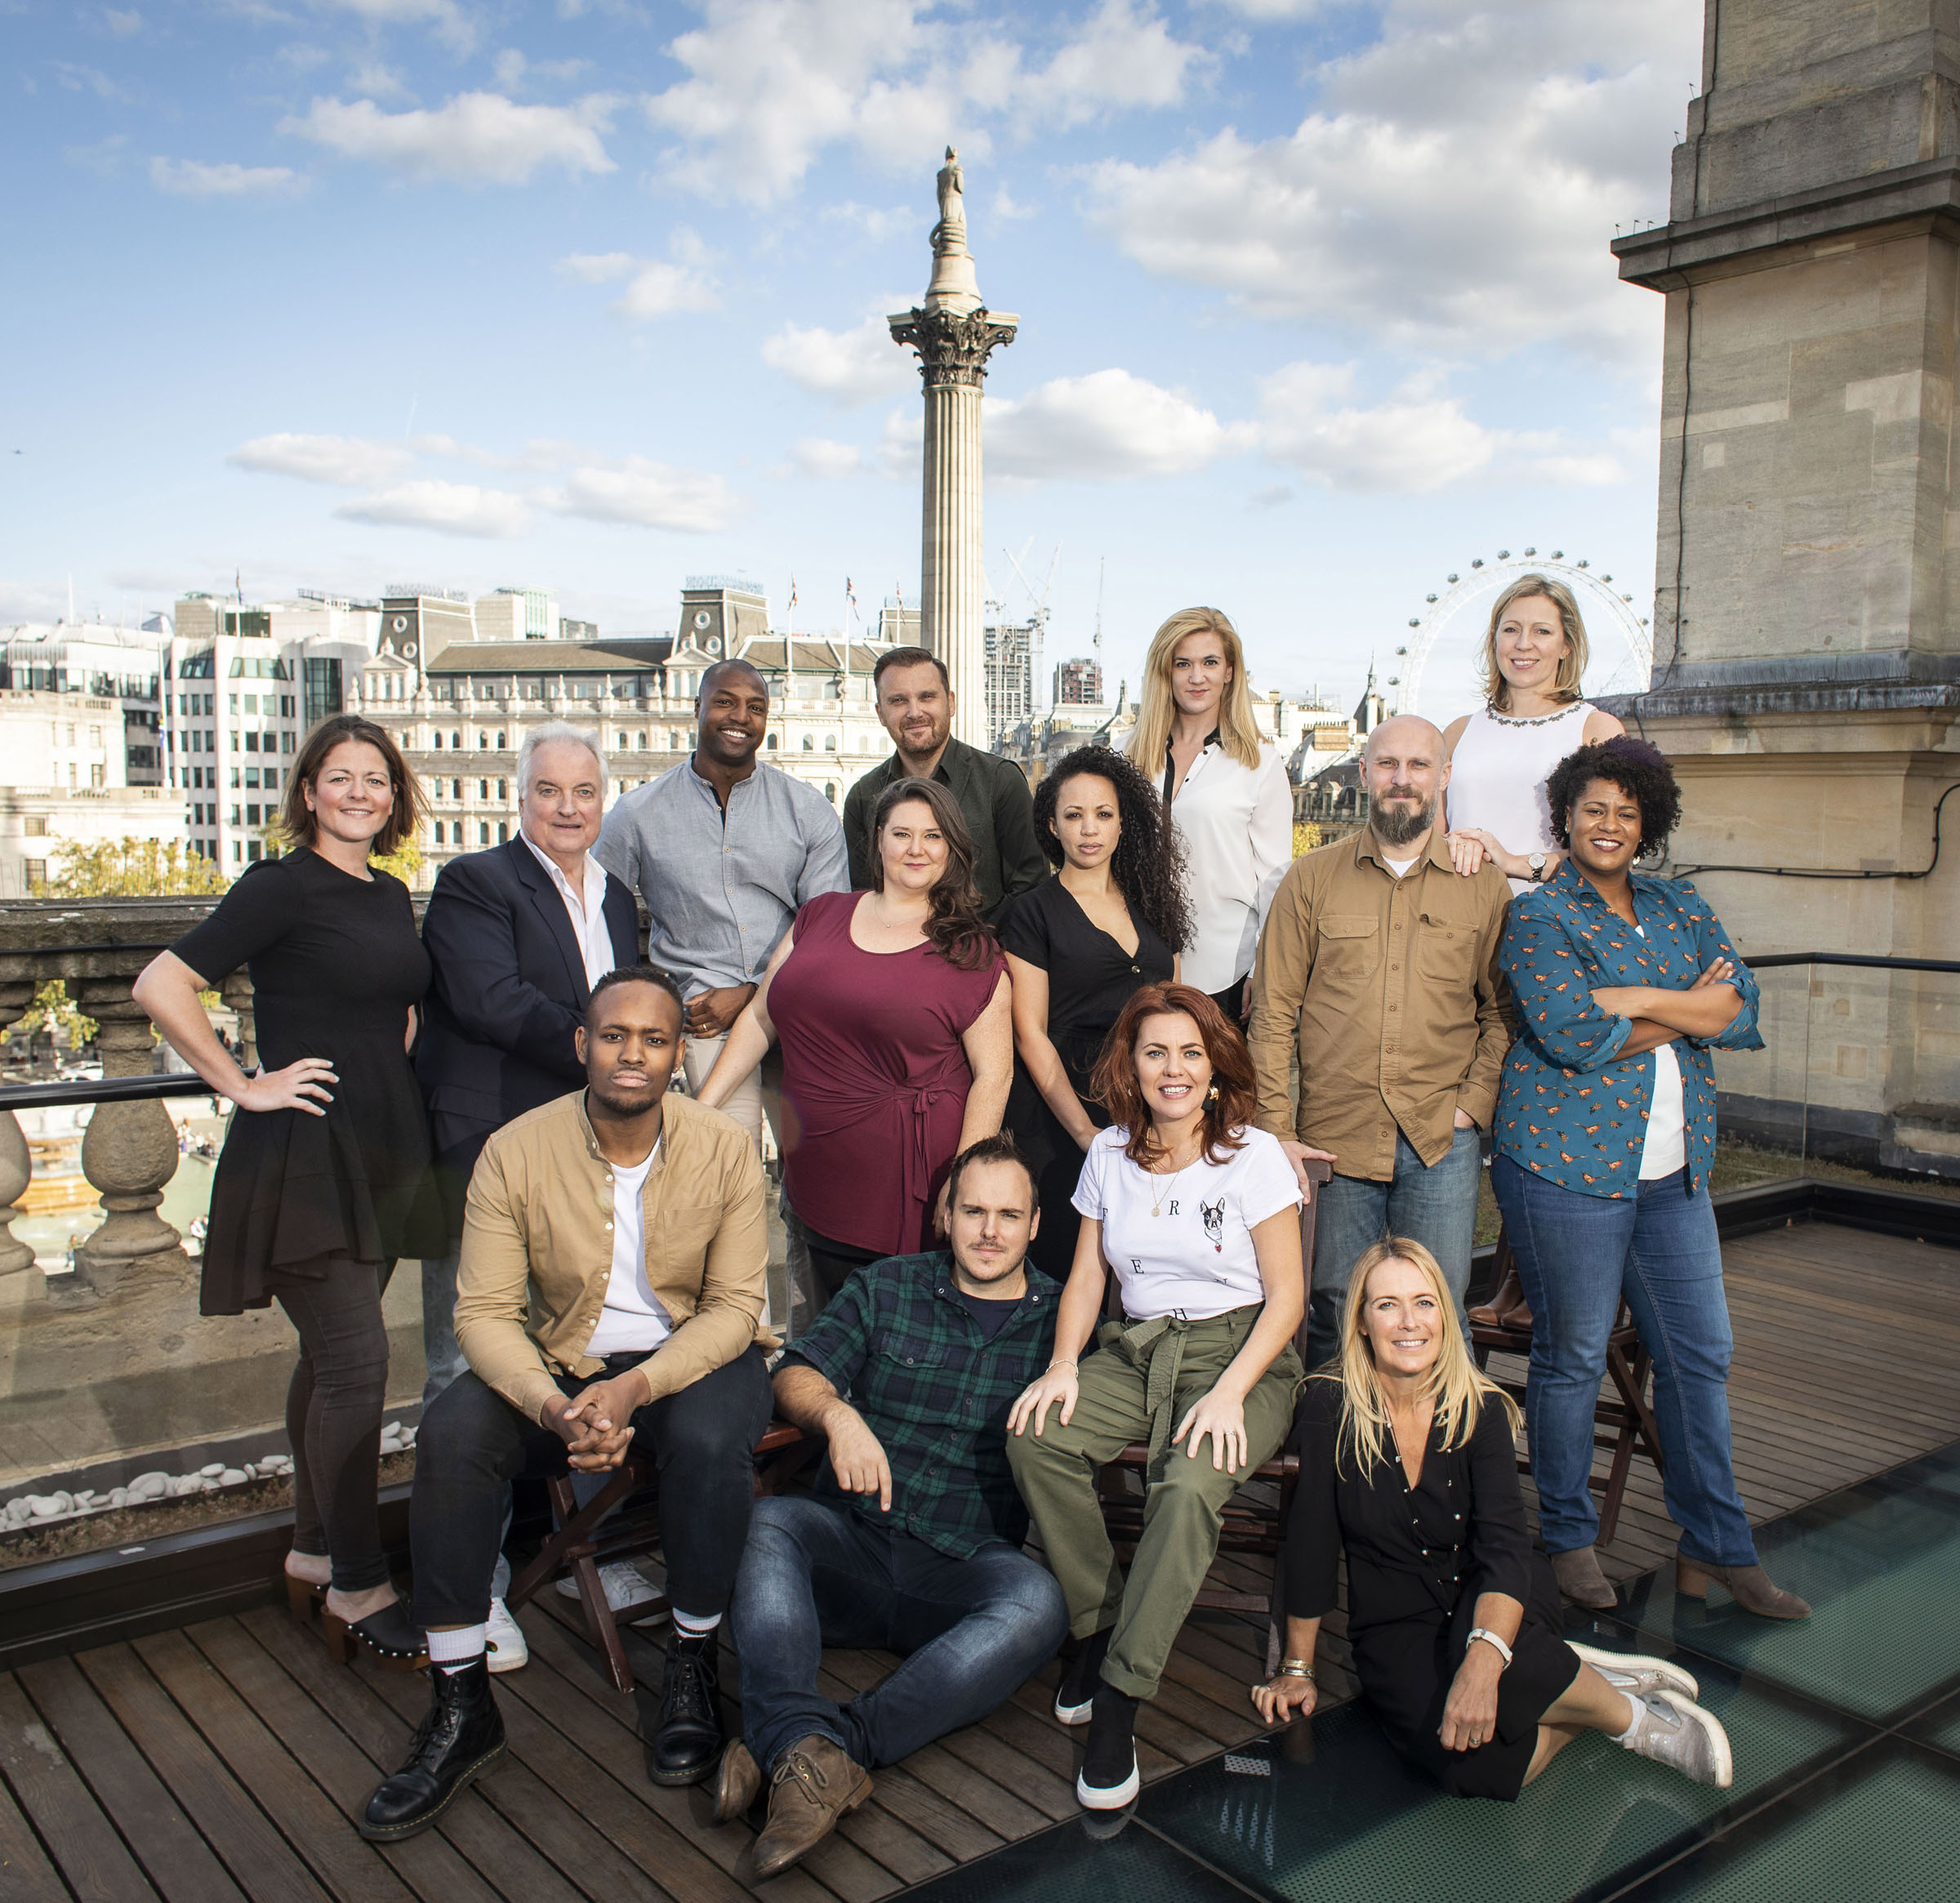 The cast of Come from Away, on the roof of Canada House